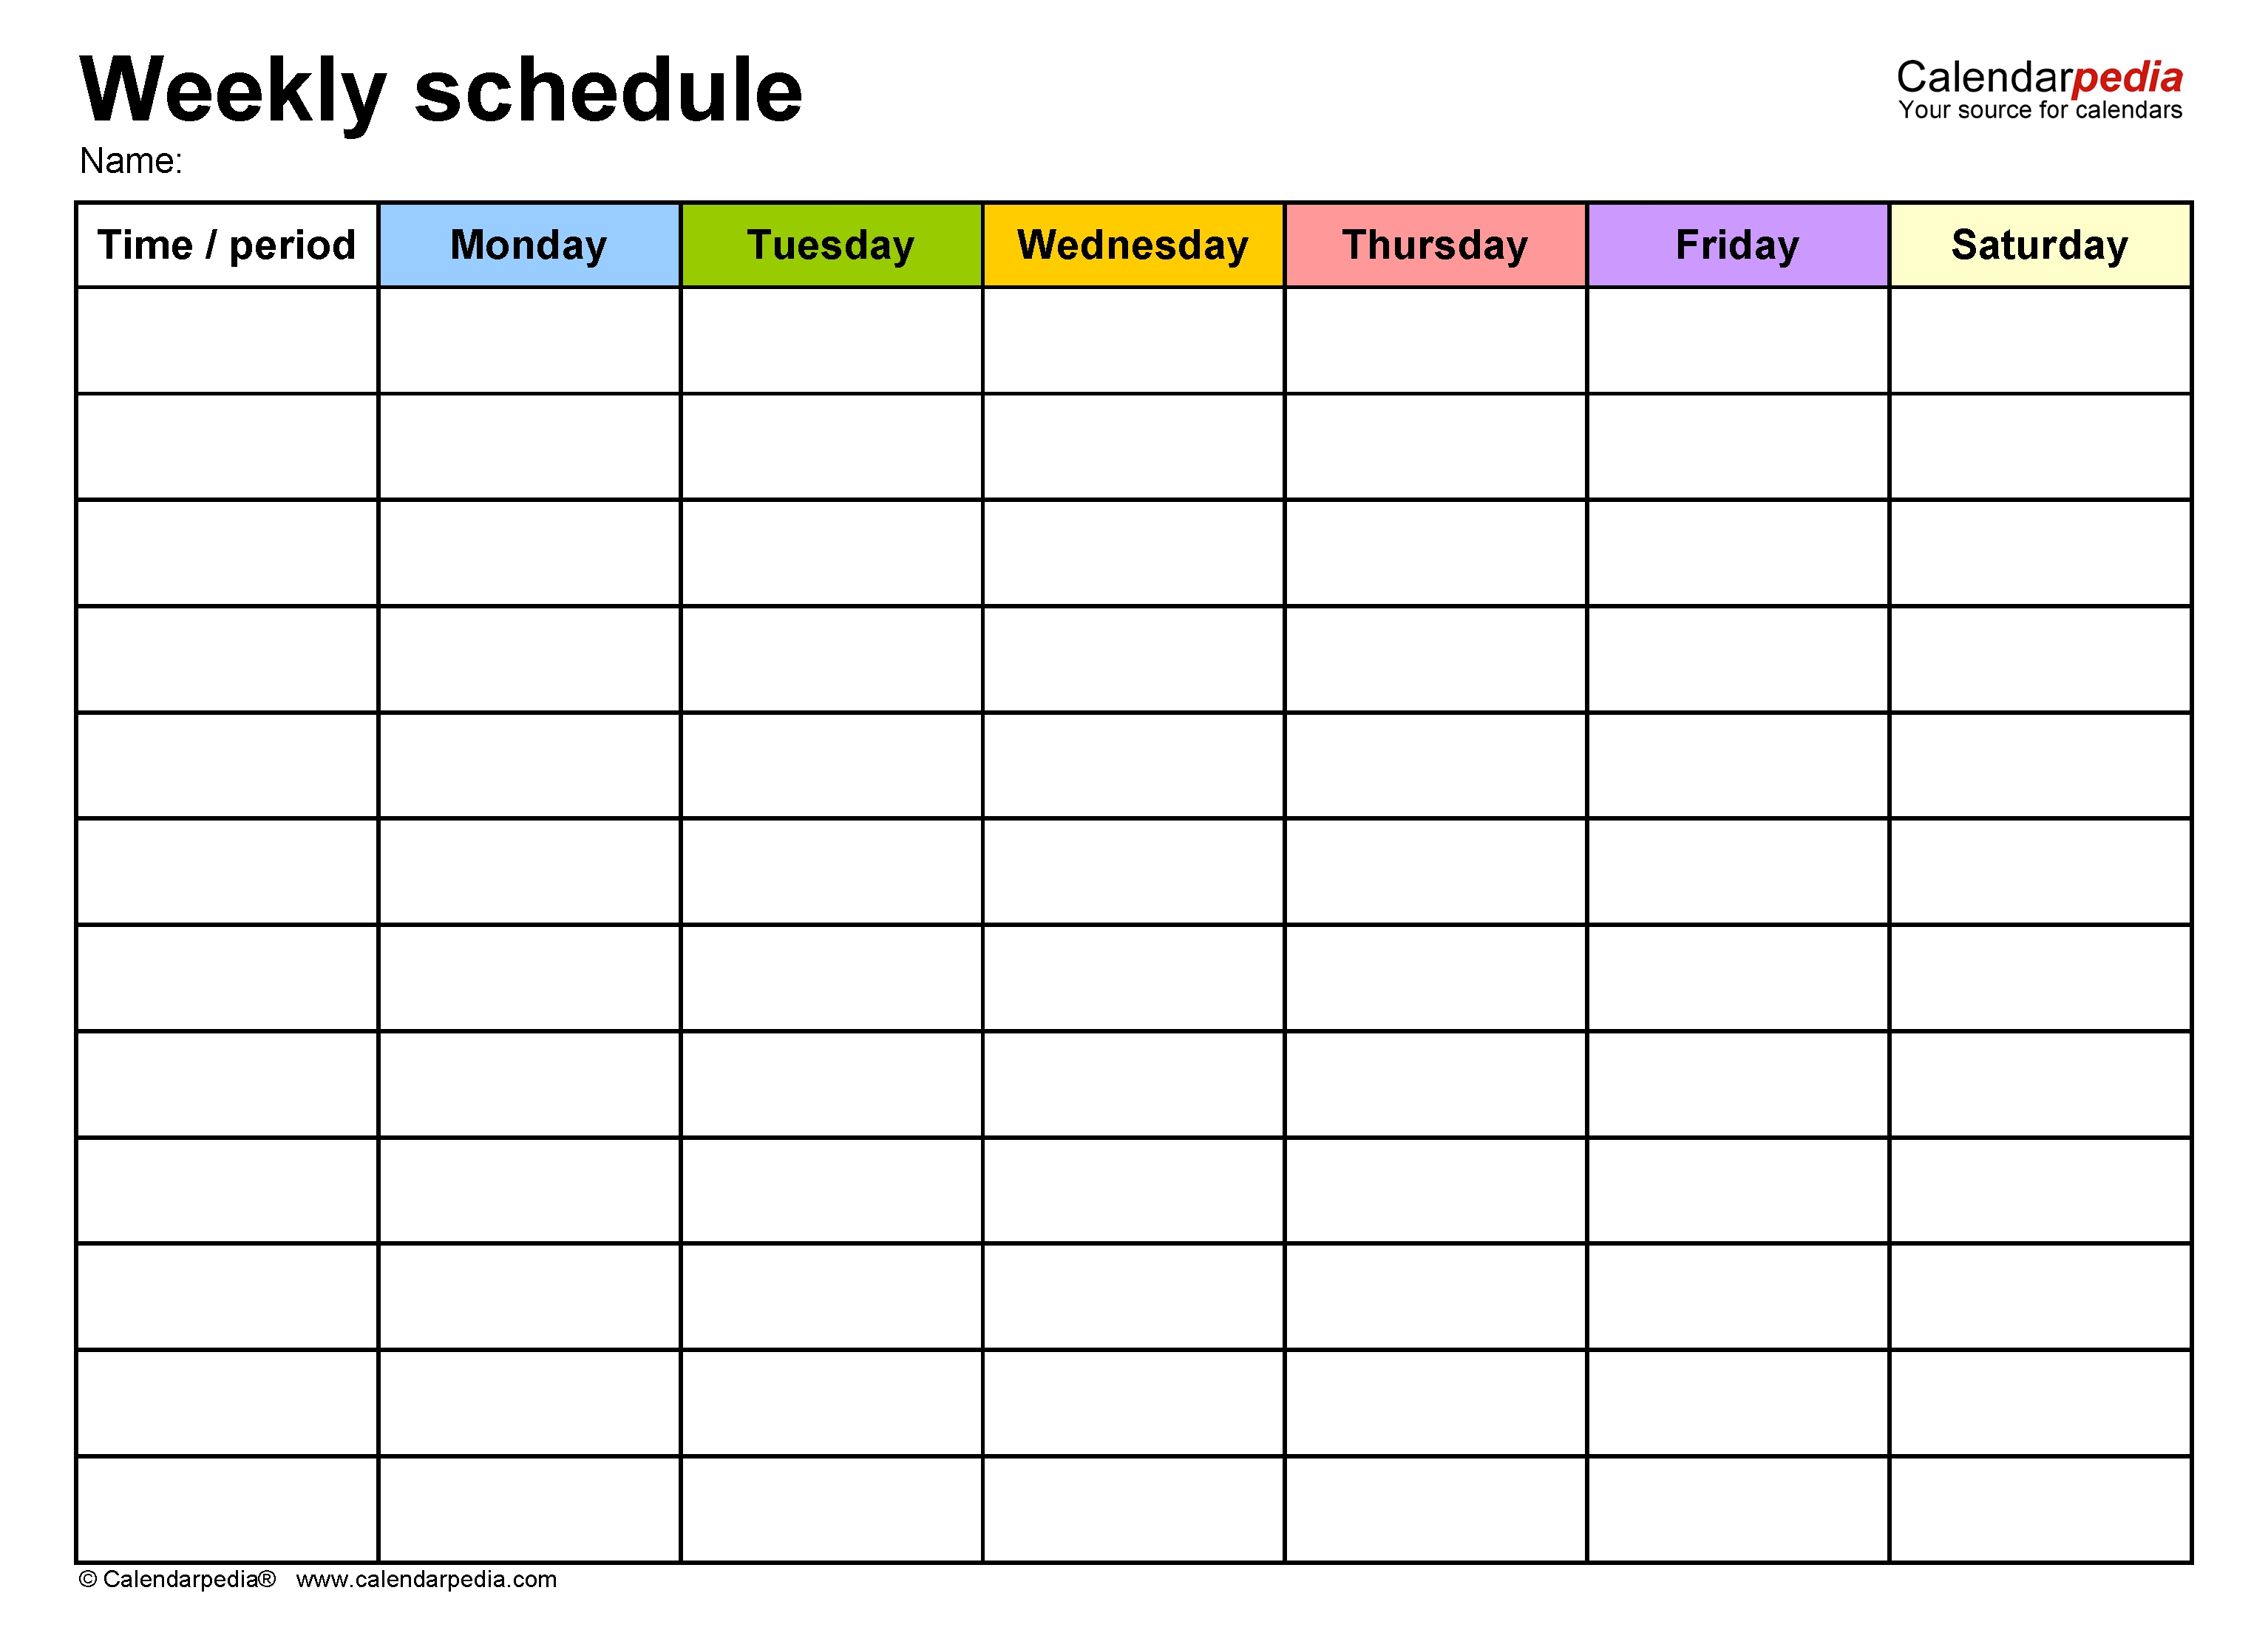 Free Weekly Schedule Templates For Word - 18 Templates  Business Monday To Friday Daily Planner